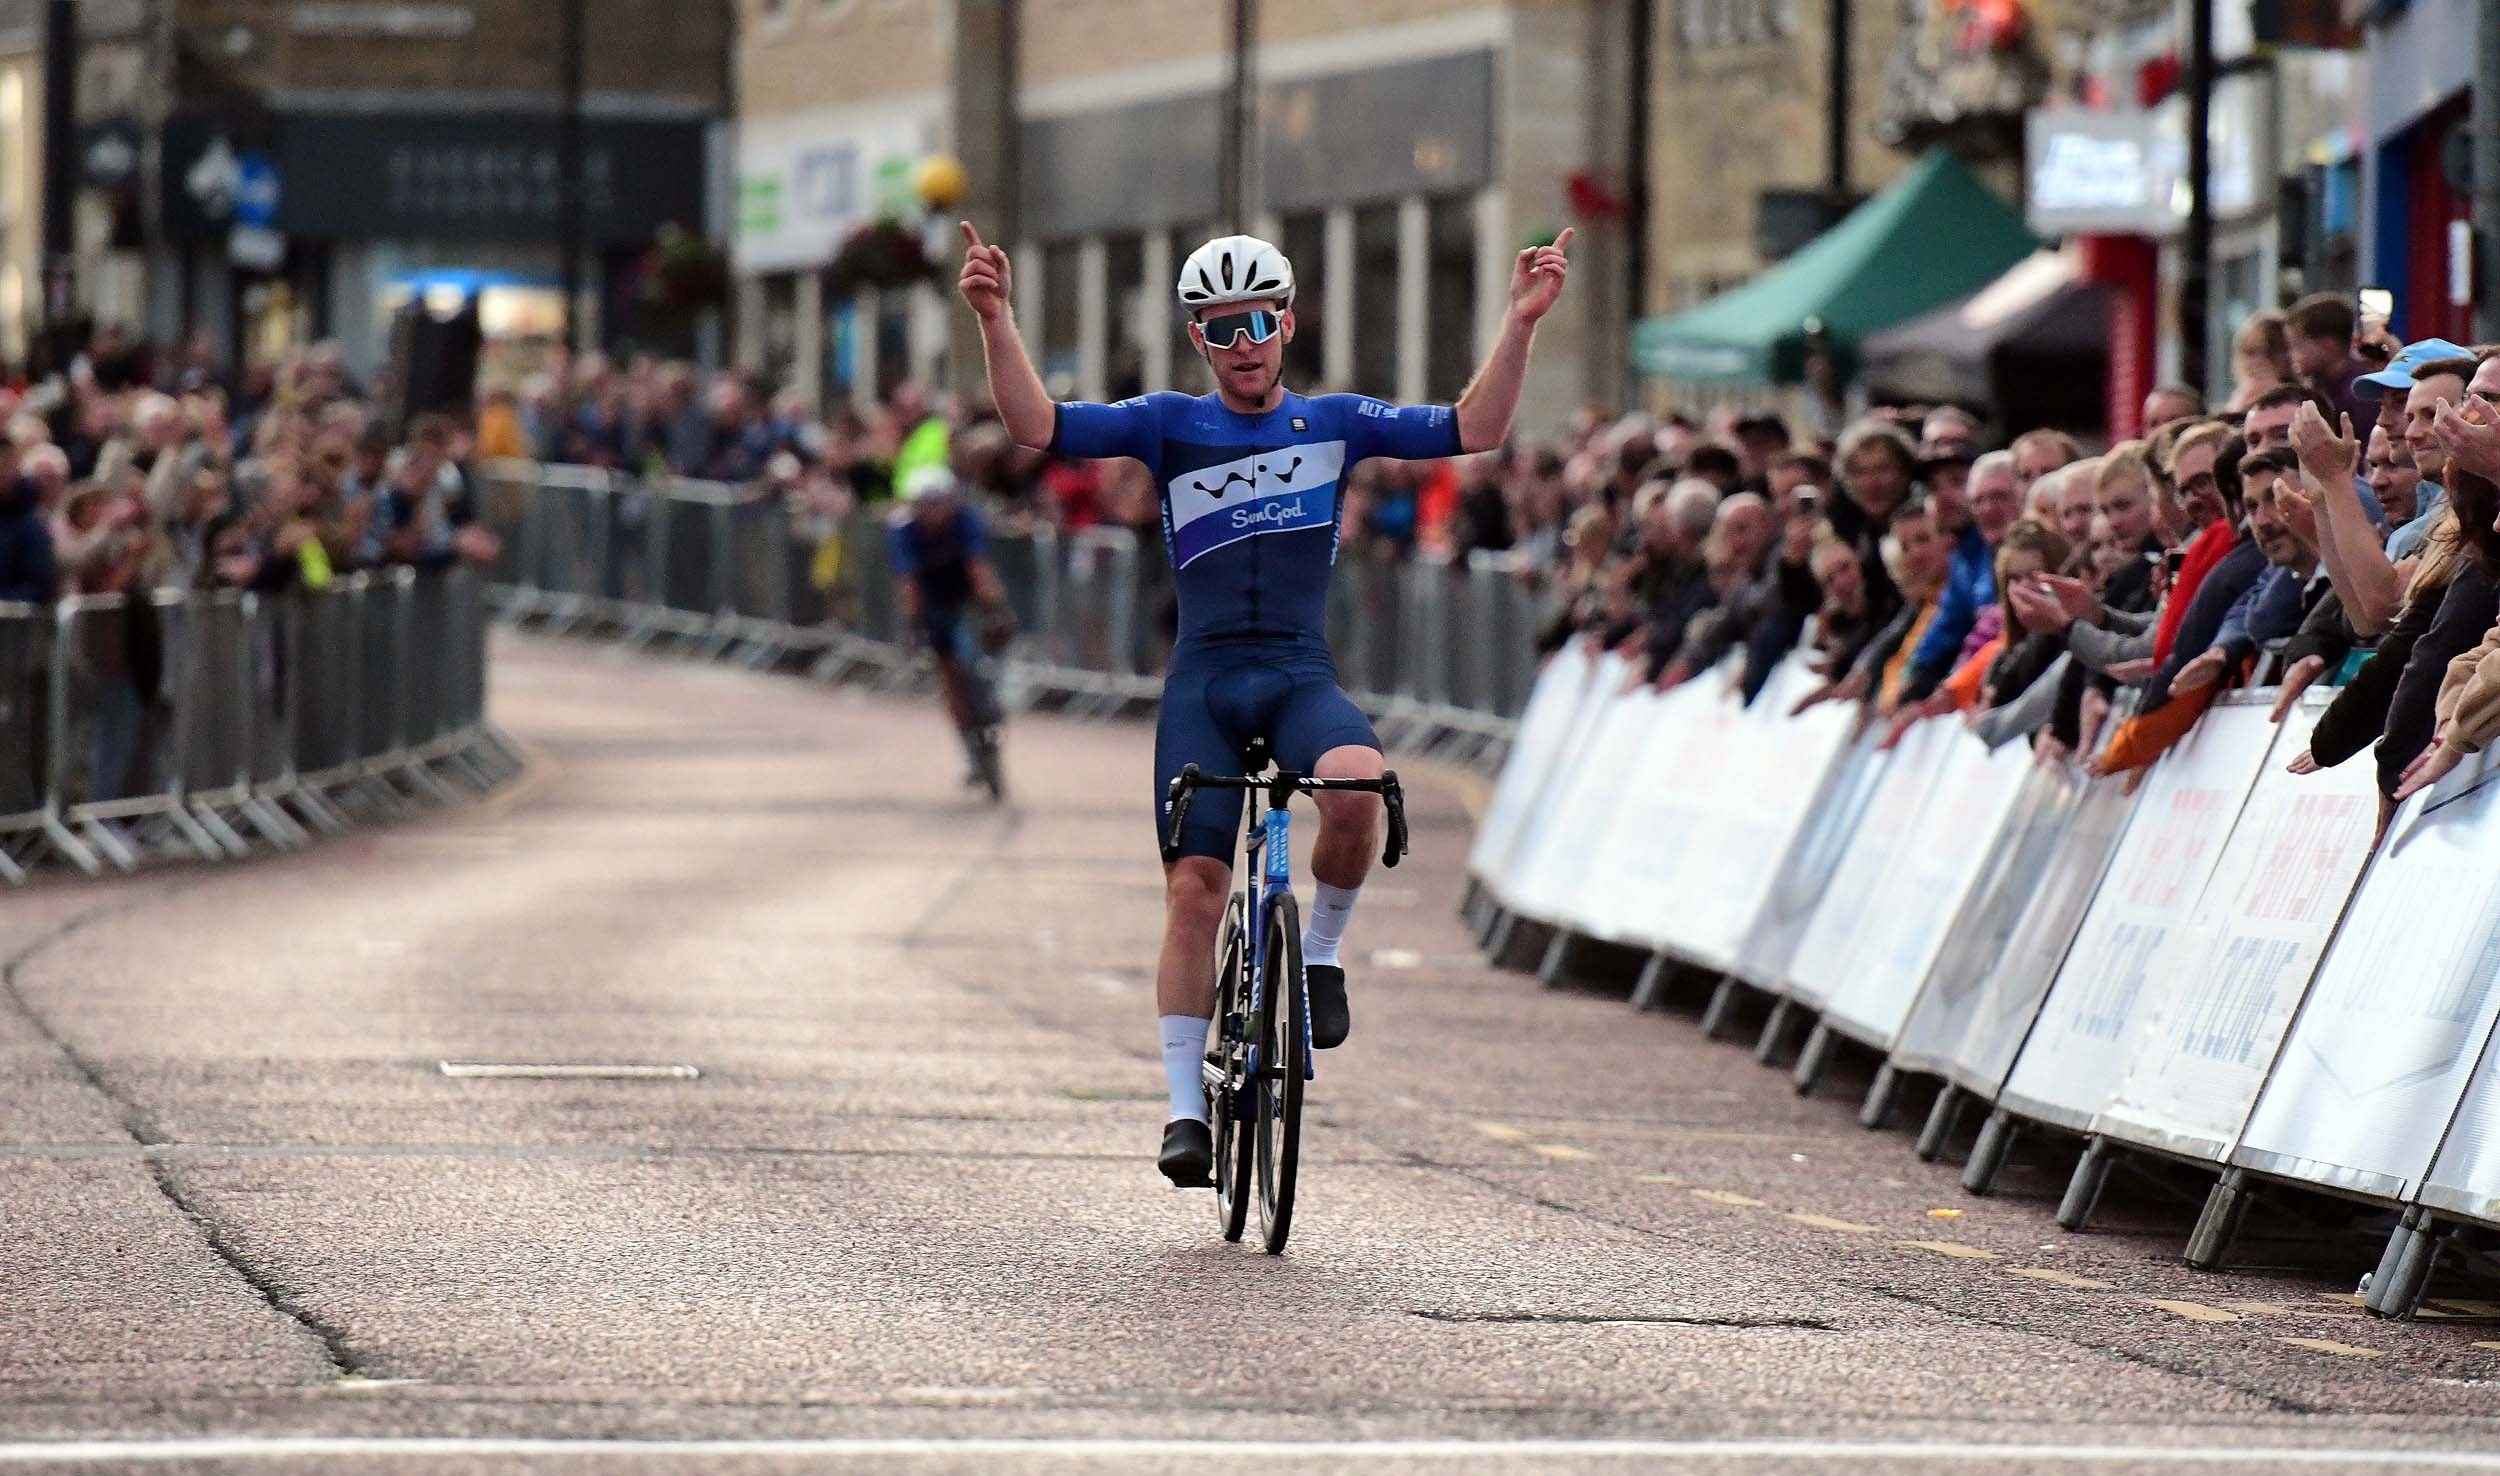 Over 5,000 spectators out for Colne Grand Prix race night